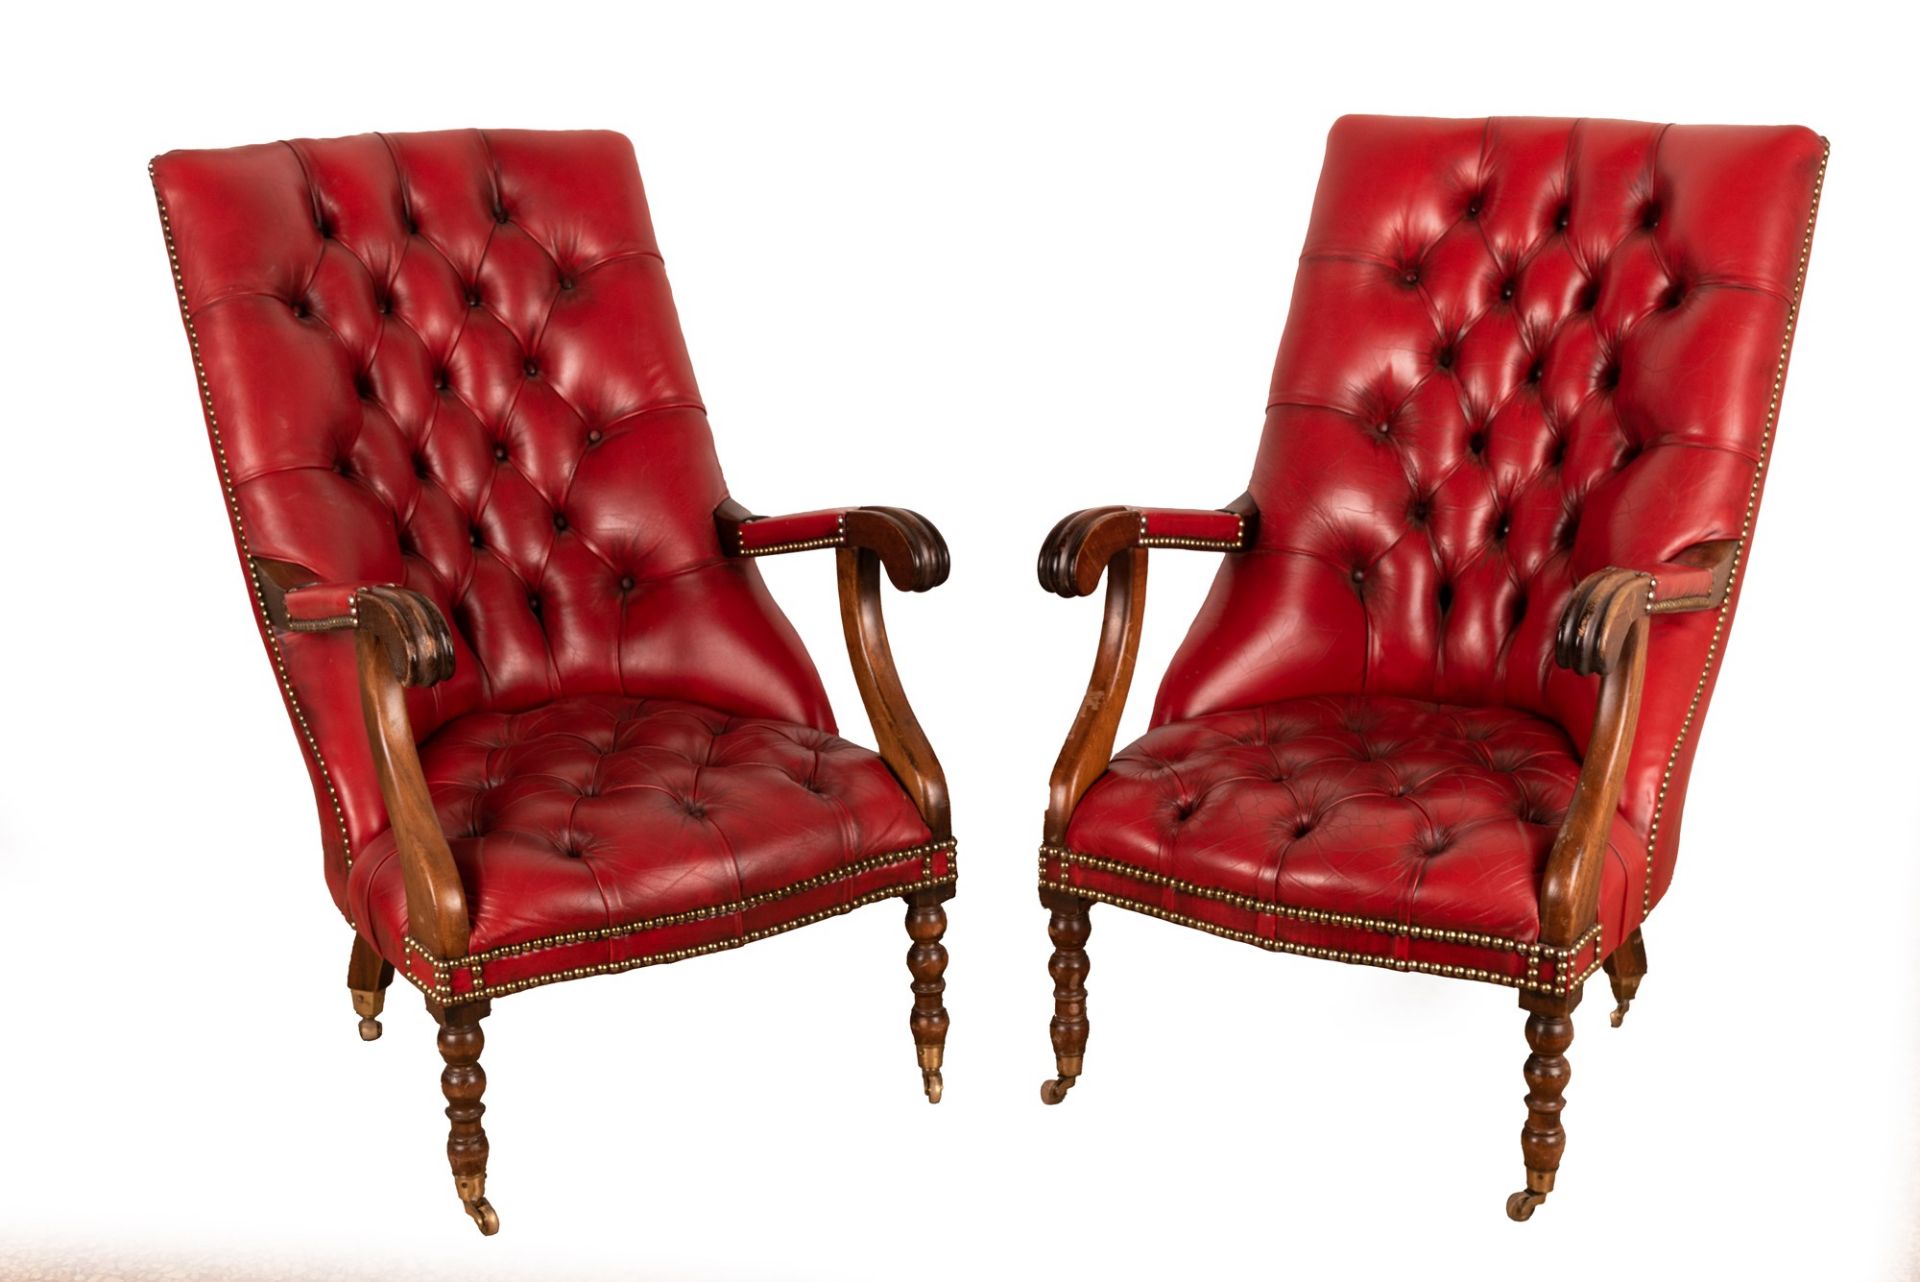 Pair of Chester chairs   20th century